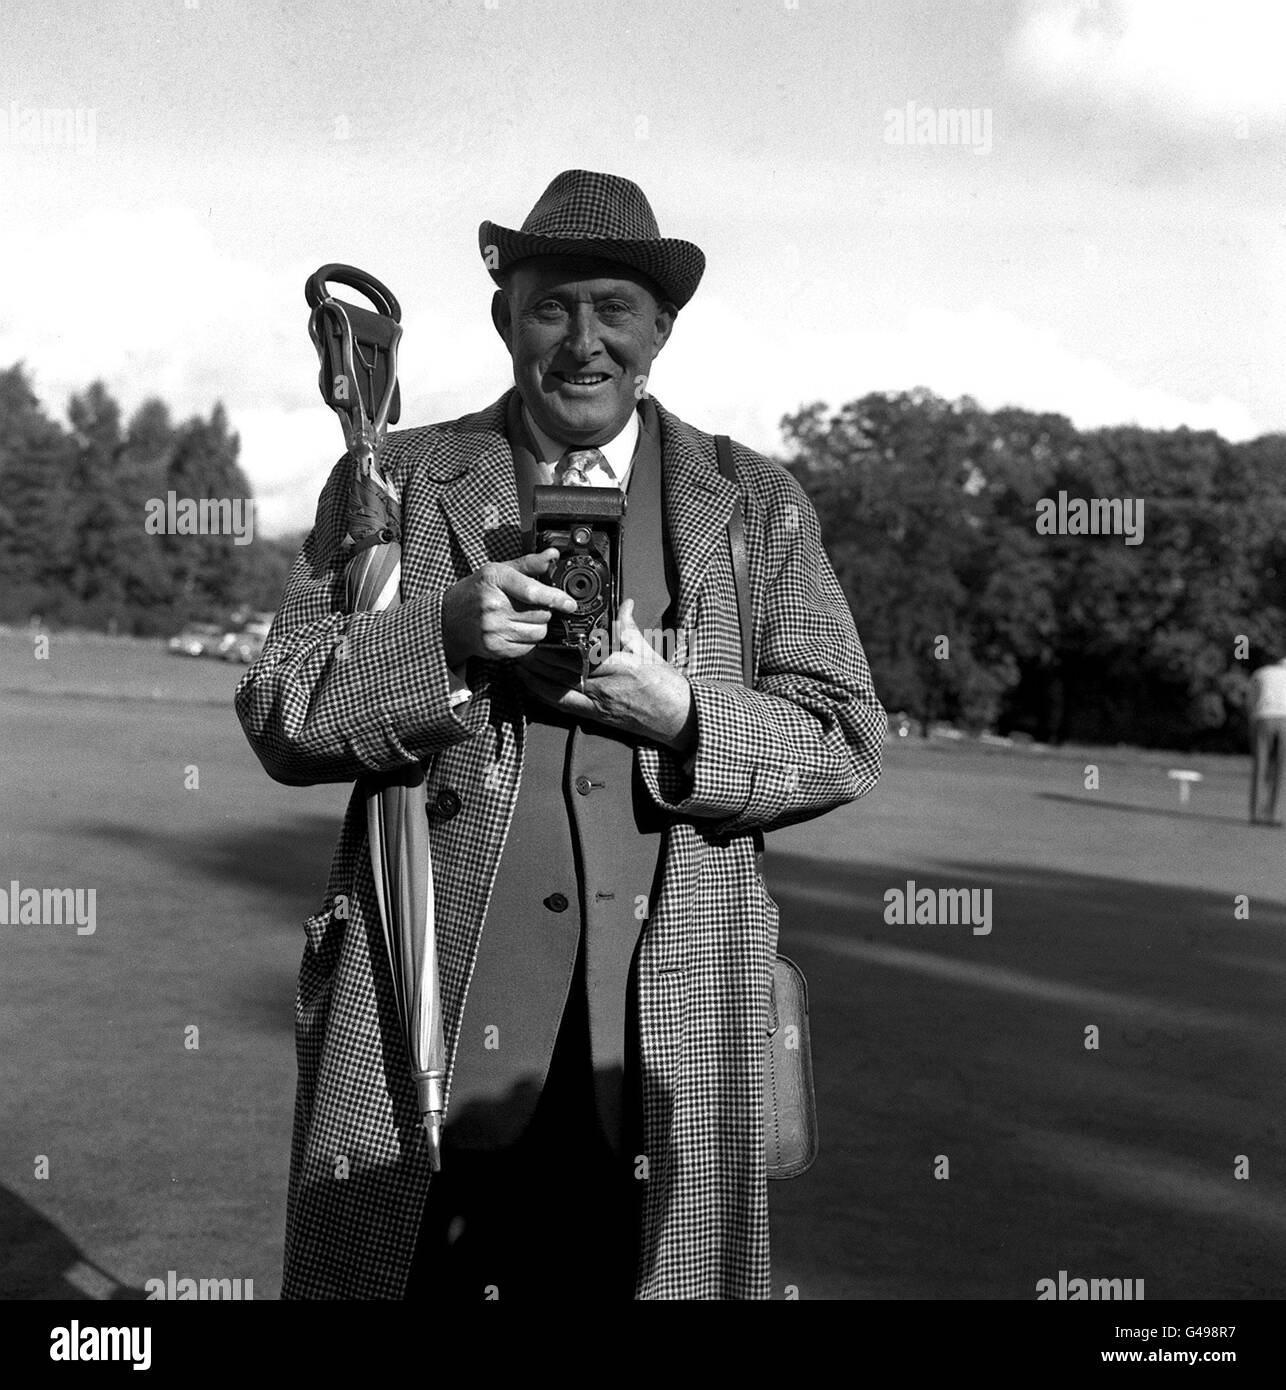 PA NEWS PHOTO 5/10/61  COMEDIAN MAX MILLER AT WENTWORTH GOLF CLUB. HE WAS SPENDING A DAY PHOTOGRAPHING PLAYERS IN THE  7, 000 BALLENTINE'S THREE DAY GOLF TOURNAMENT. Stock Photo